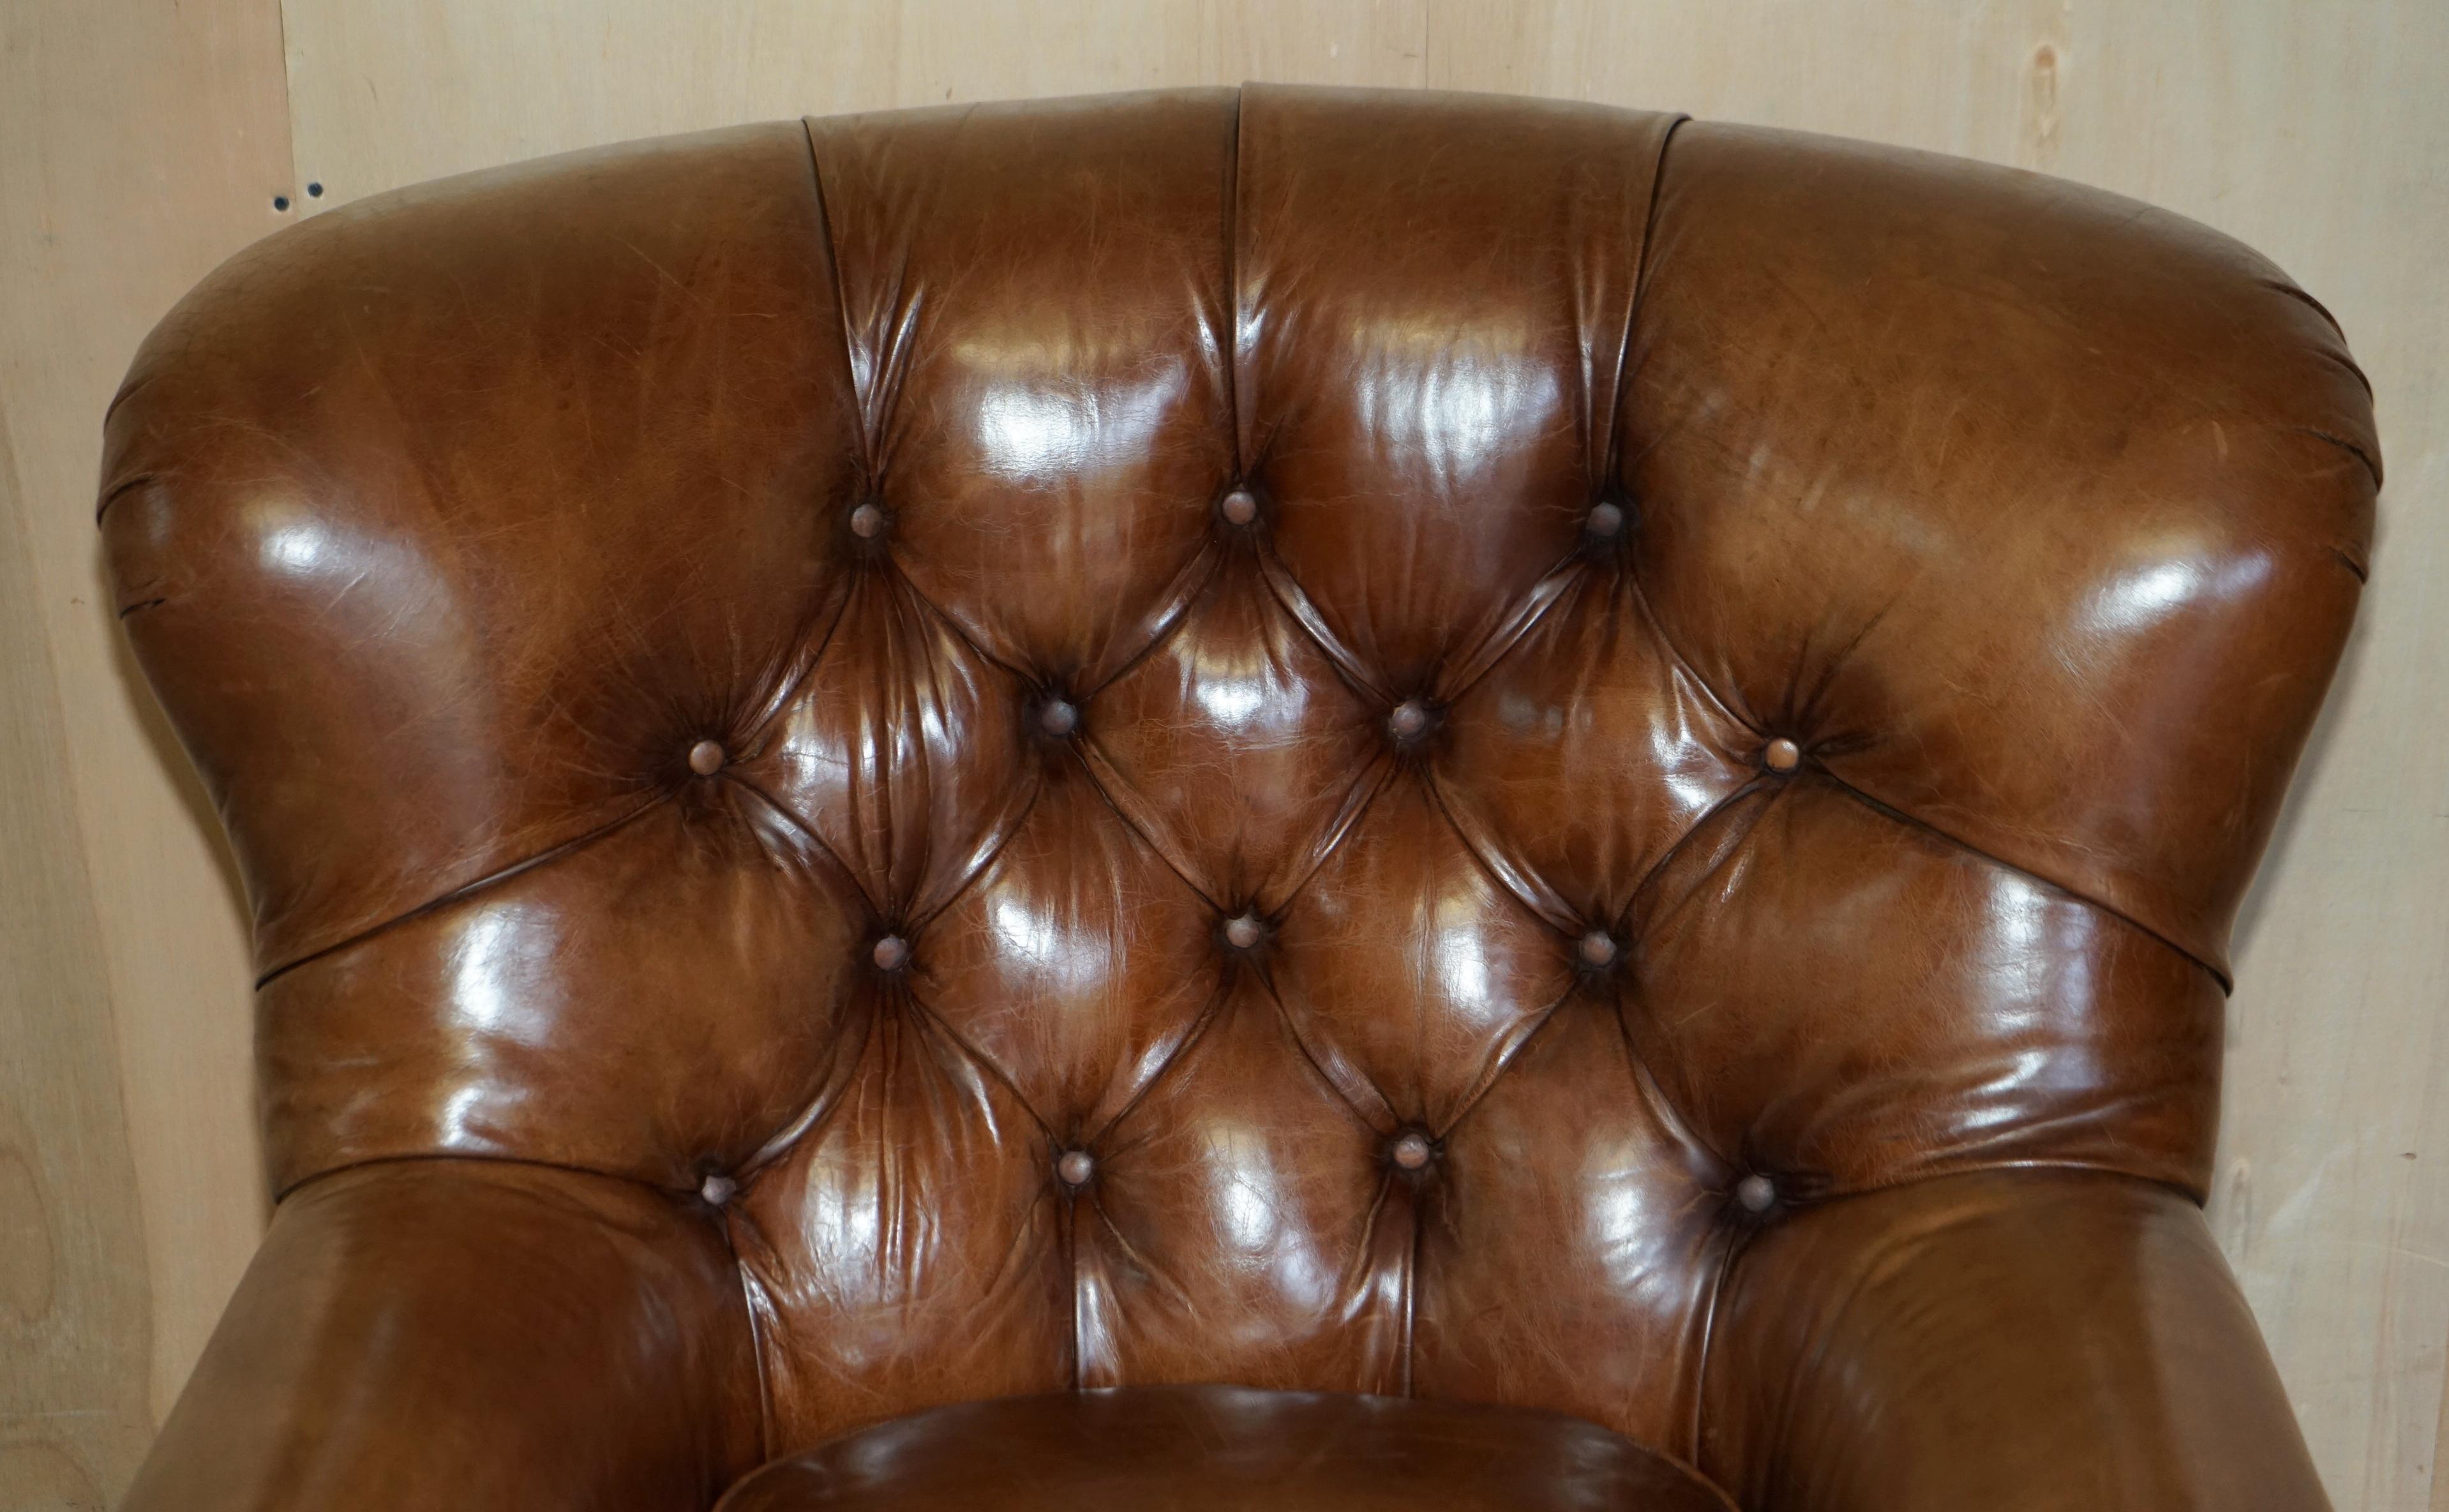 leather arm chair with ottoman